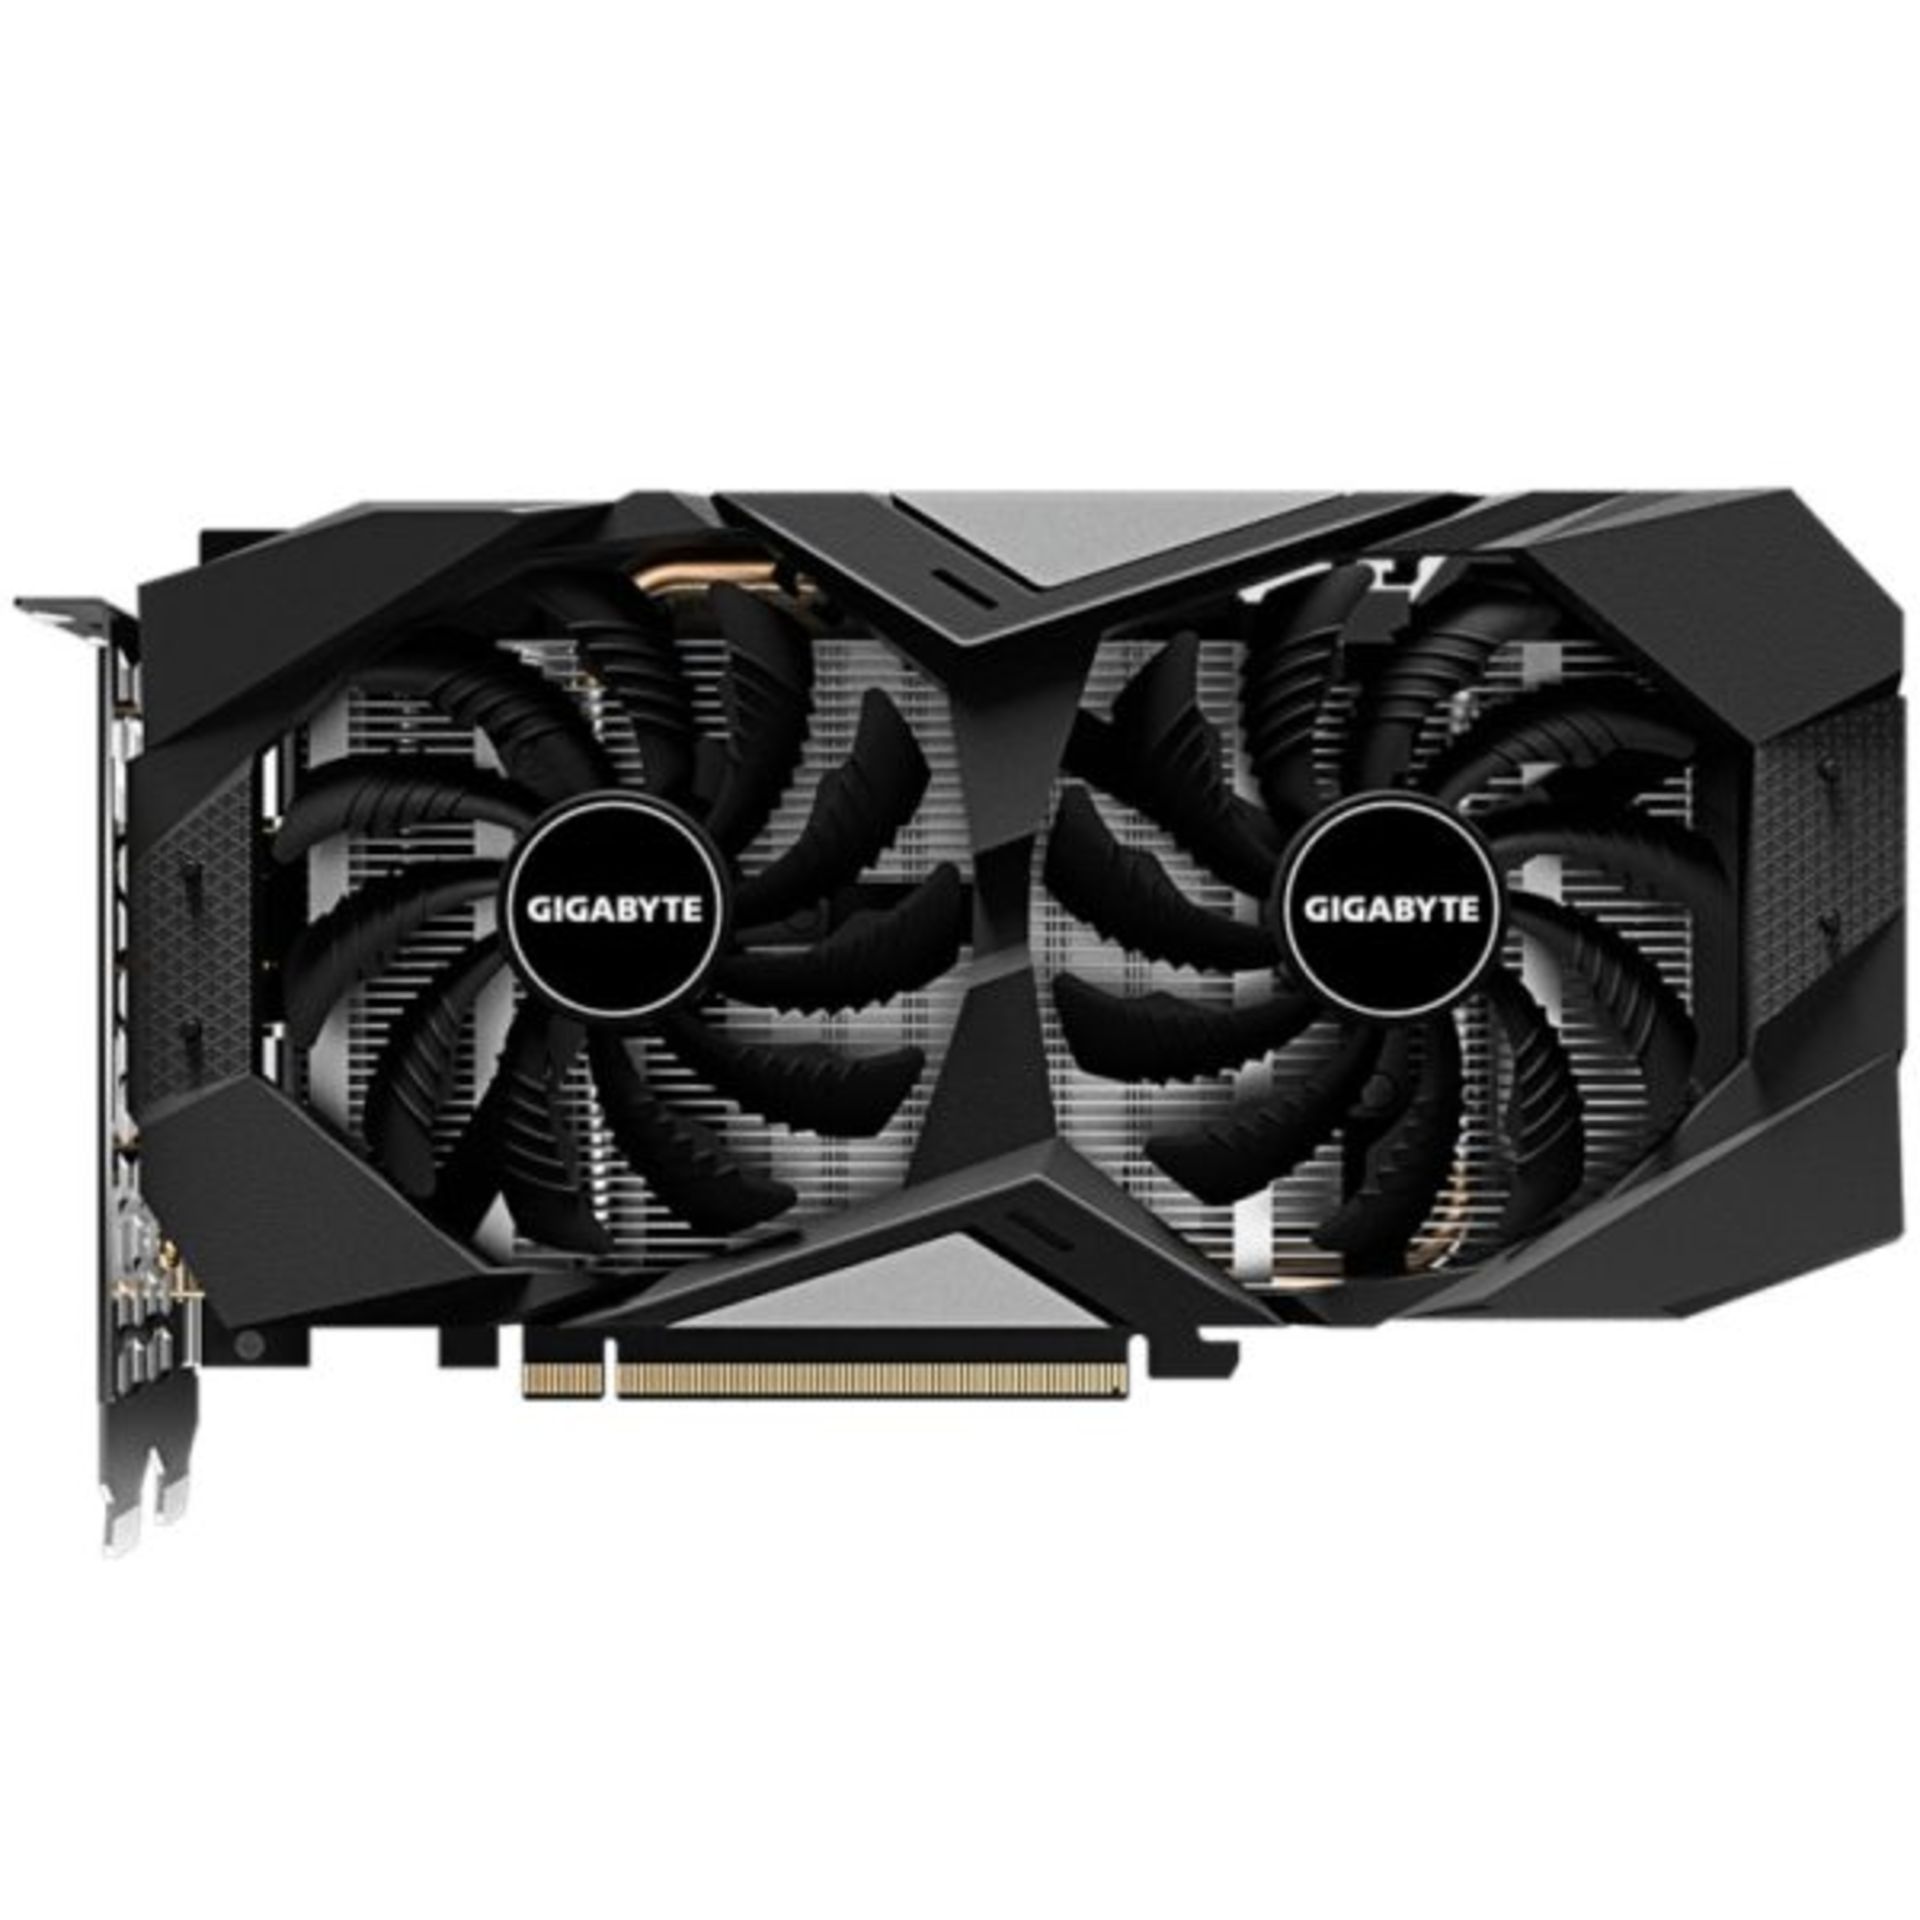 Gigabyte GEFORCE GTX 1660 SUPER OC Card. - P2. RRP £555.00. NVIDIA Turing architecture and GeForce